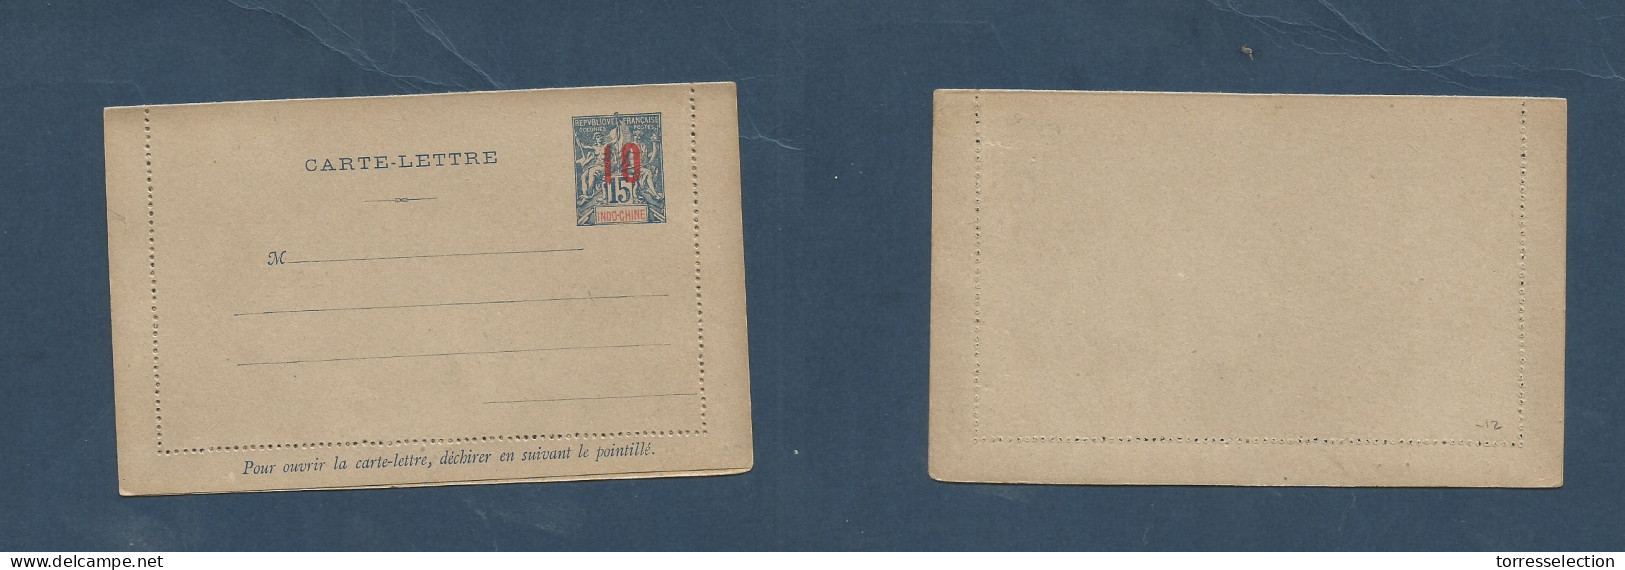 INDOCHINA. C. 1900 10c / 15c Mint Sage Issue Ovptd Stat Lettersheet. Fine. XSALE. - Asia (Other)